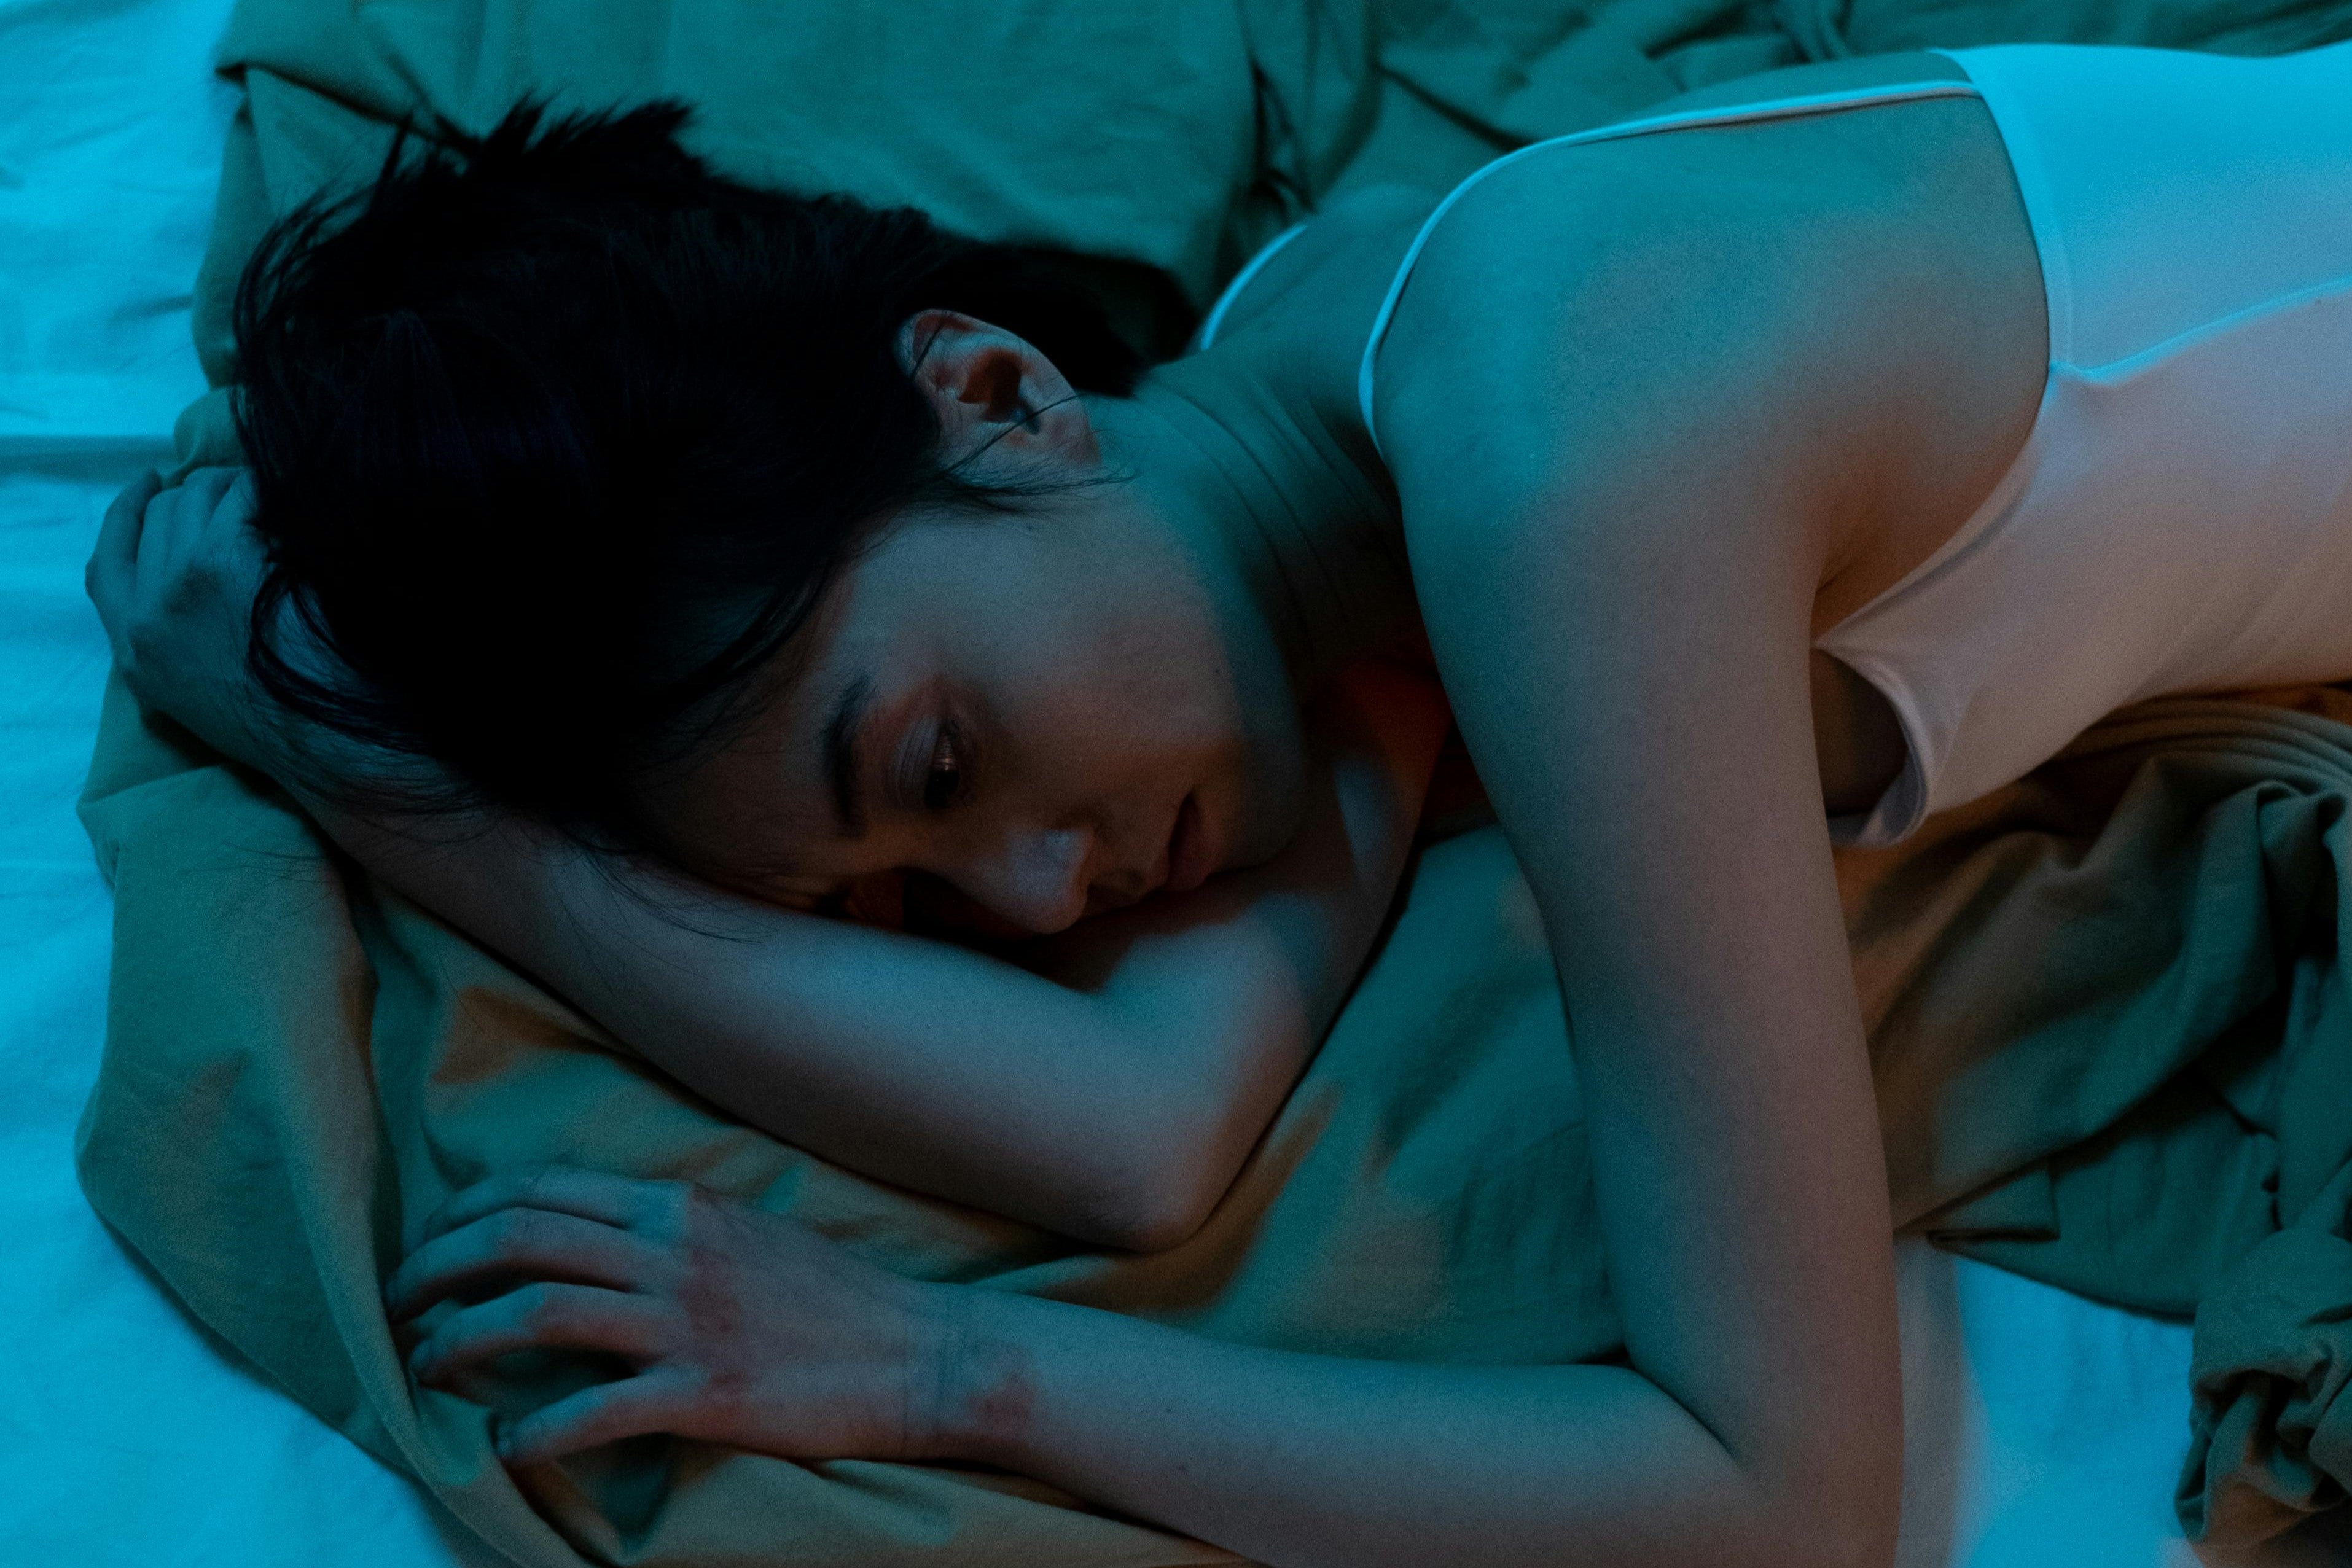 A Stressed Woman in White Tank Top Lying on Bed